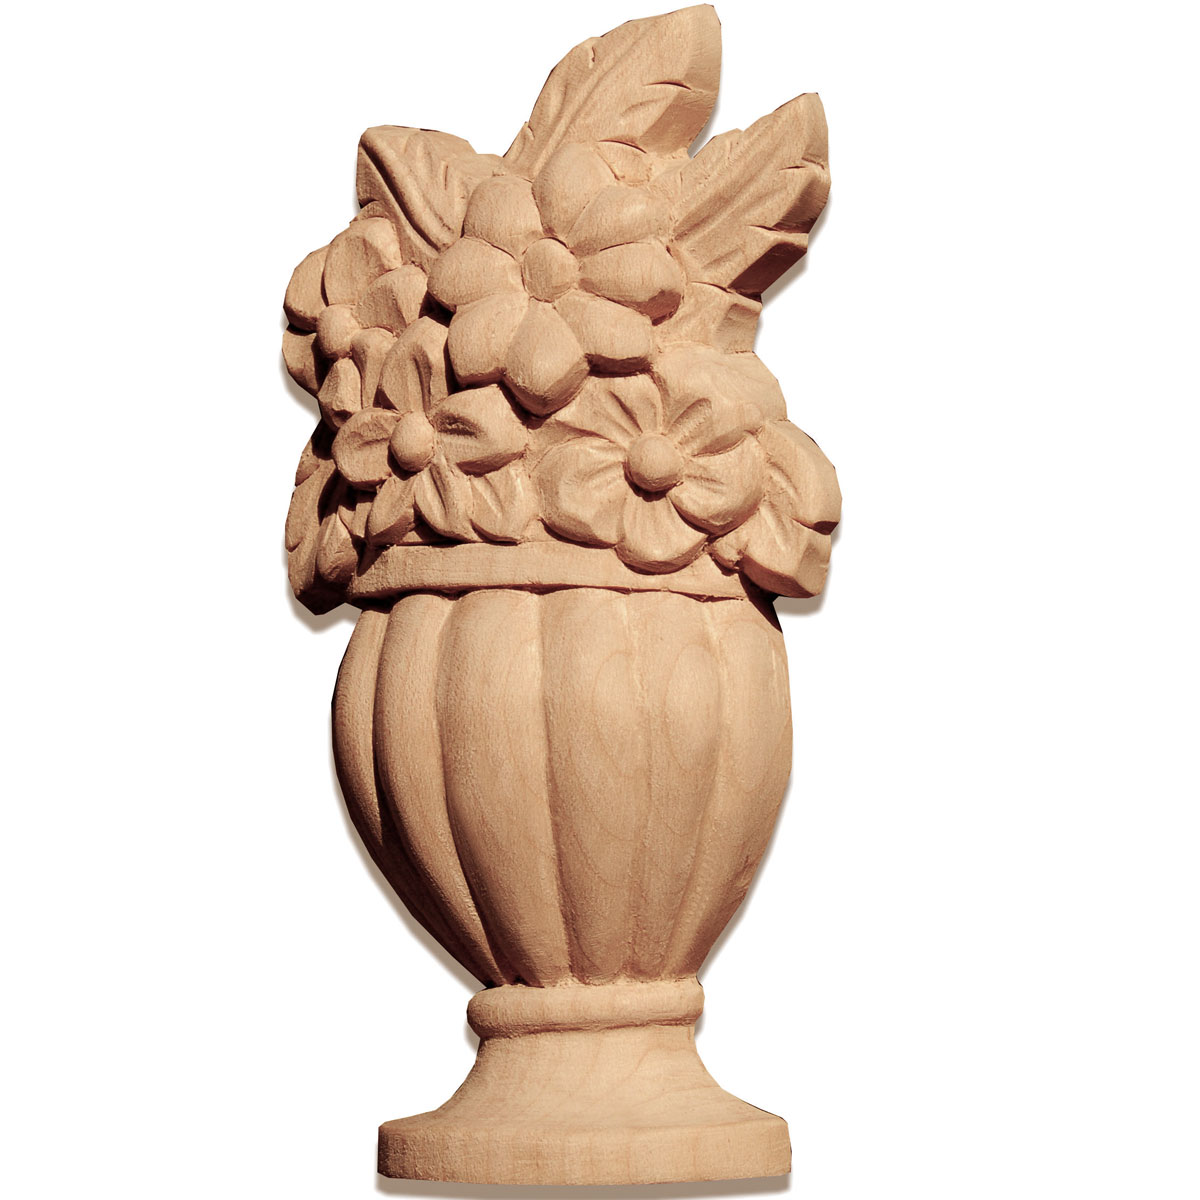 Sanford Urn Wood Carving - Wood Carvings - Appliques and Onlays